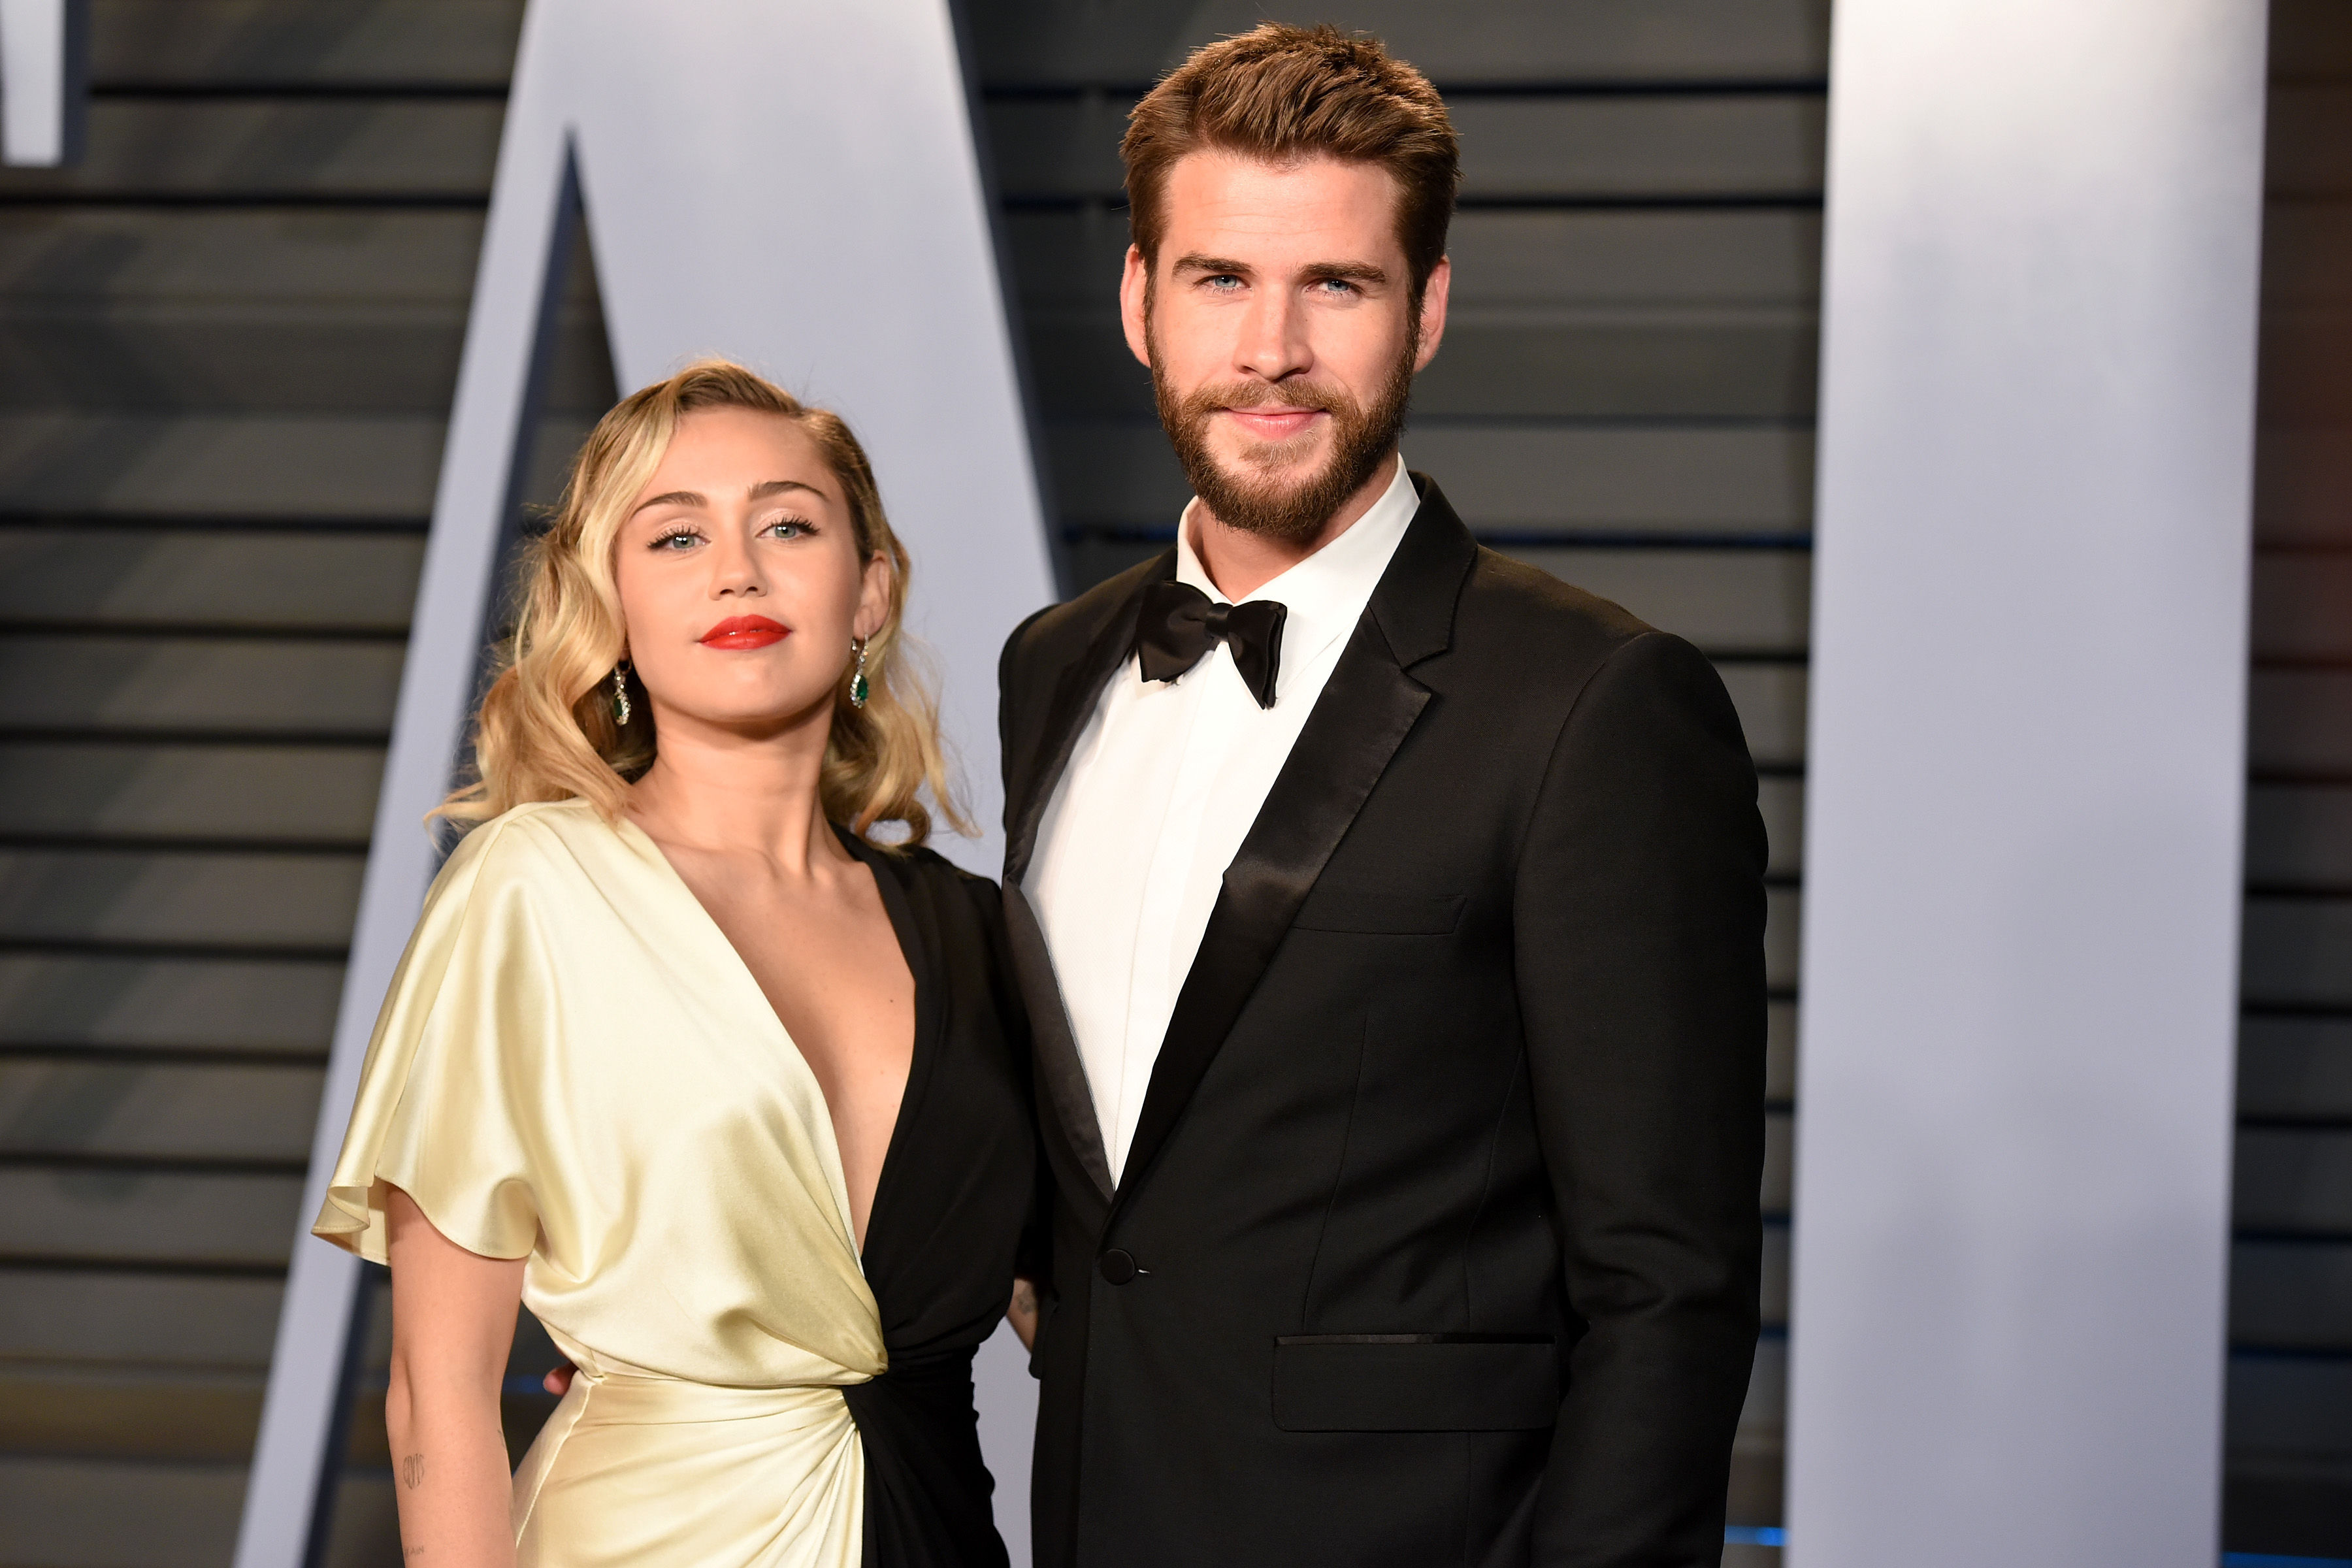 Miley Cyrus and Liam Hemsworth attend the 2018 Vanity Fair Oscar Party on March 4, 2018 in Beverly Hills, CA.  